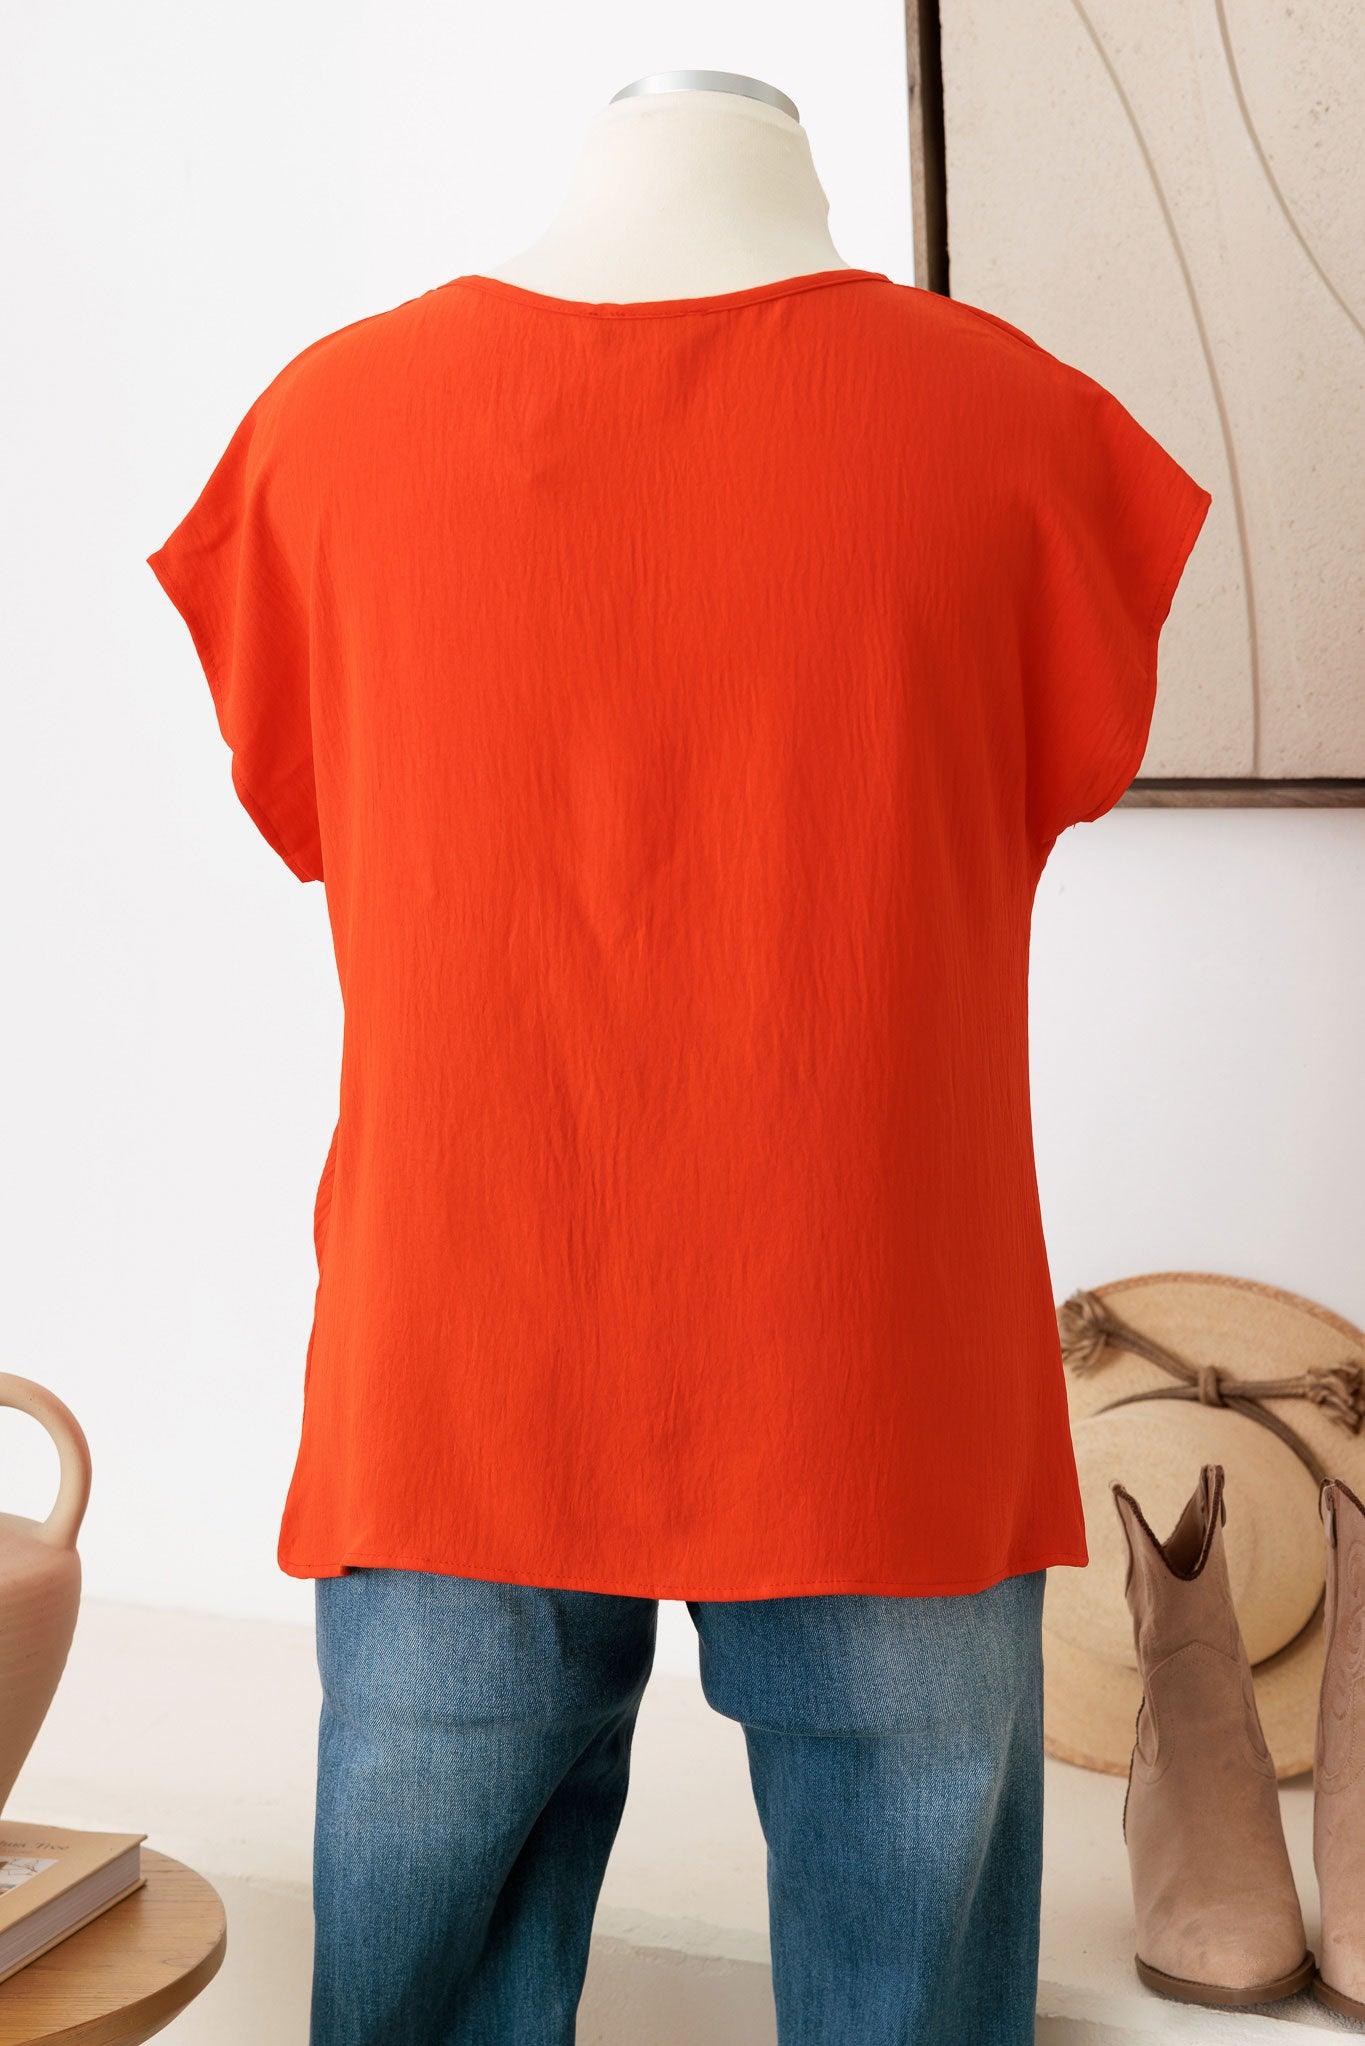 Plus Size Front Knot Solid Woven Tee